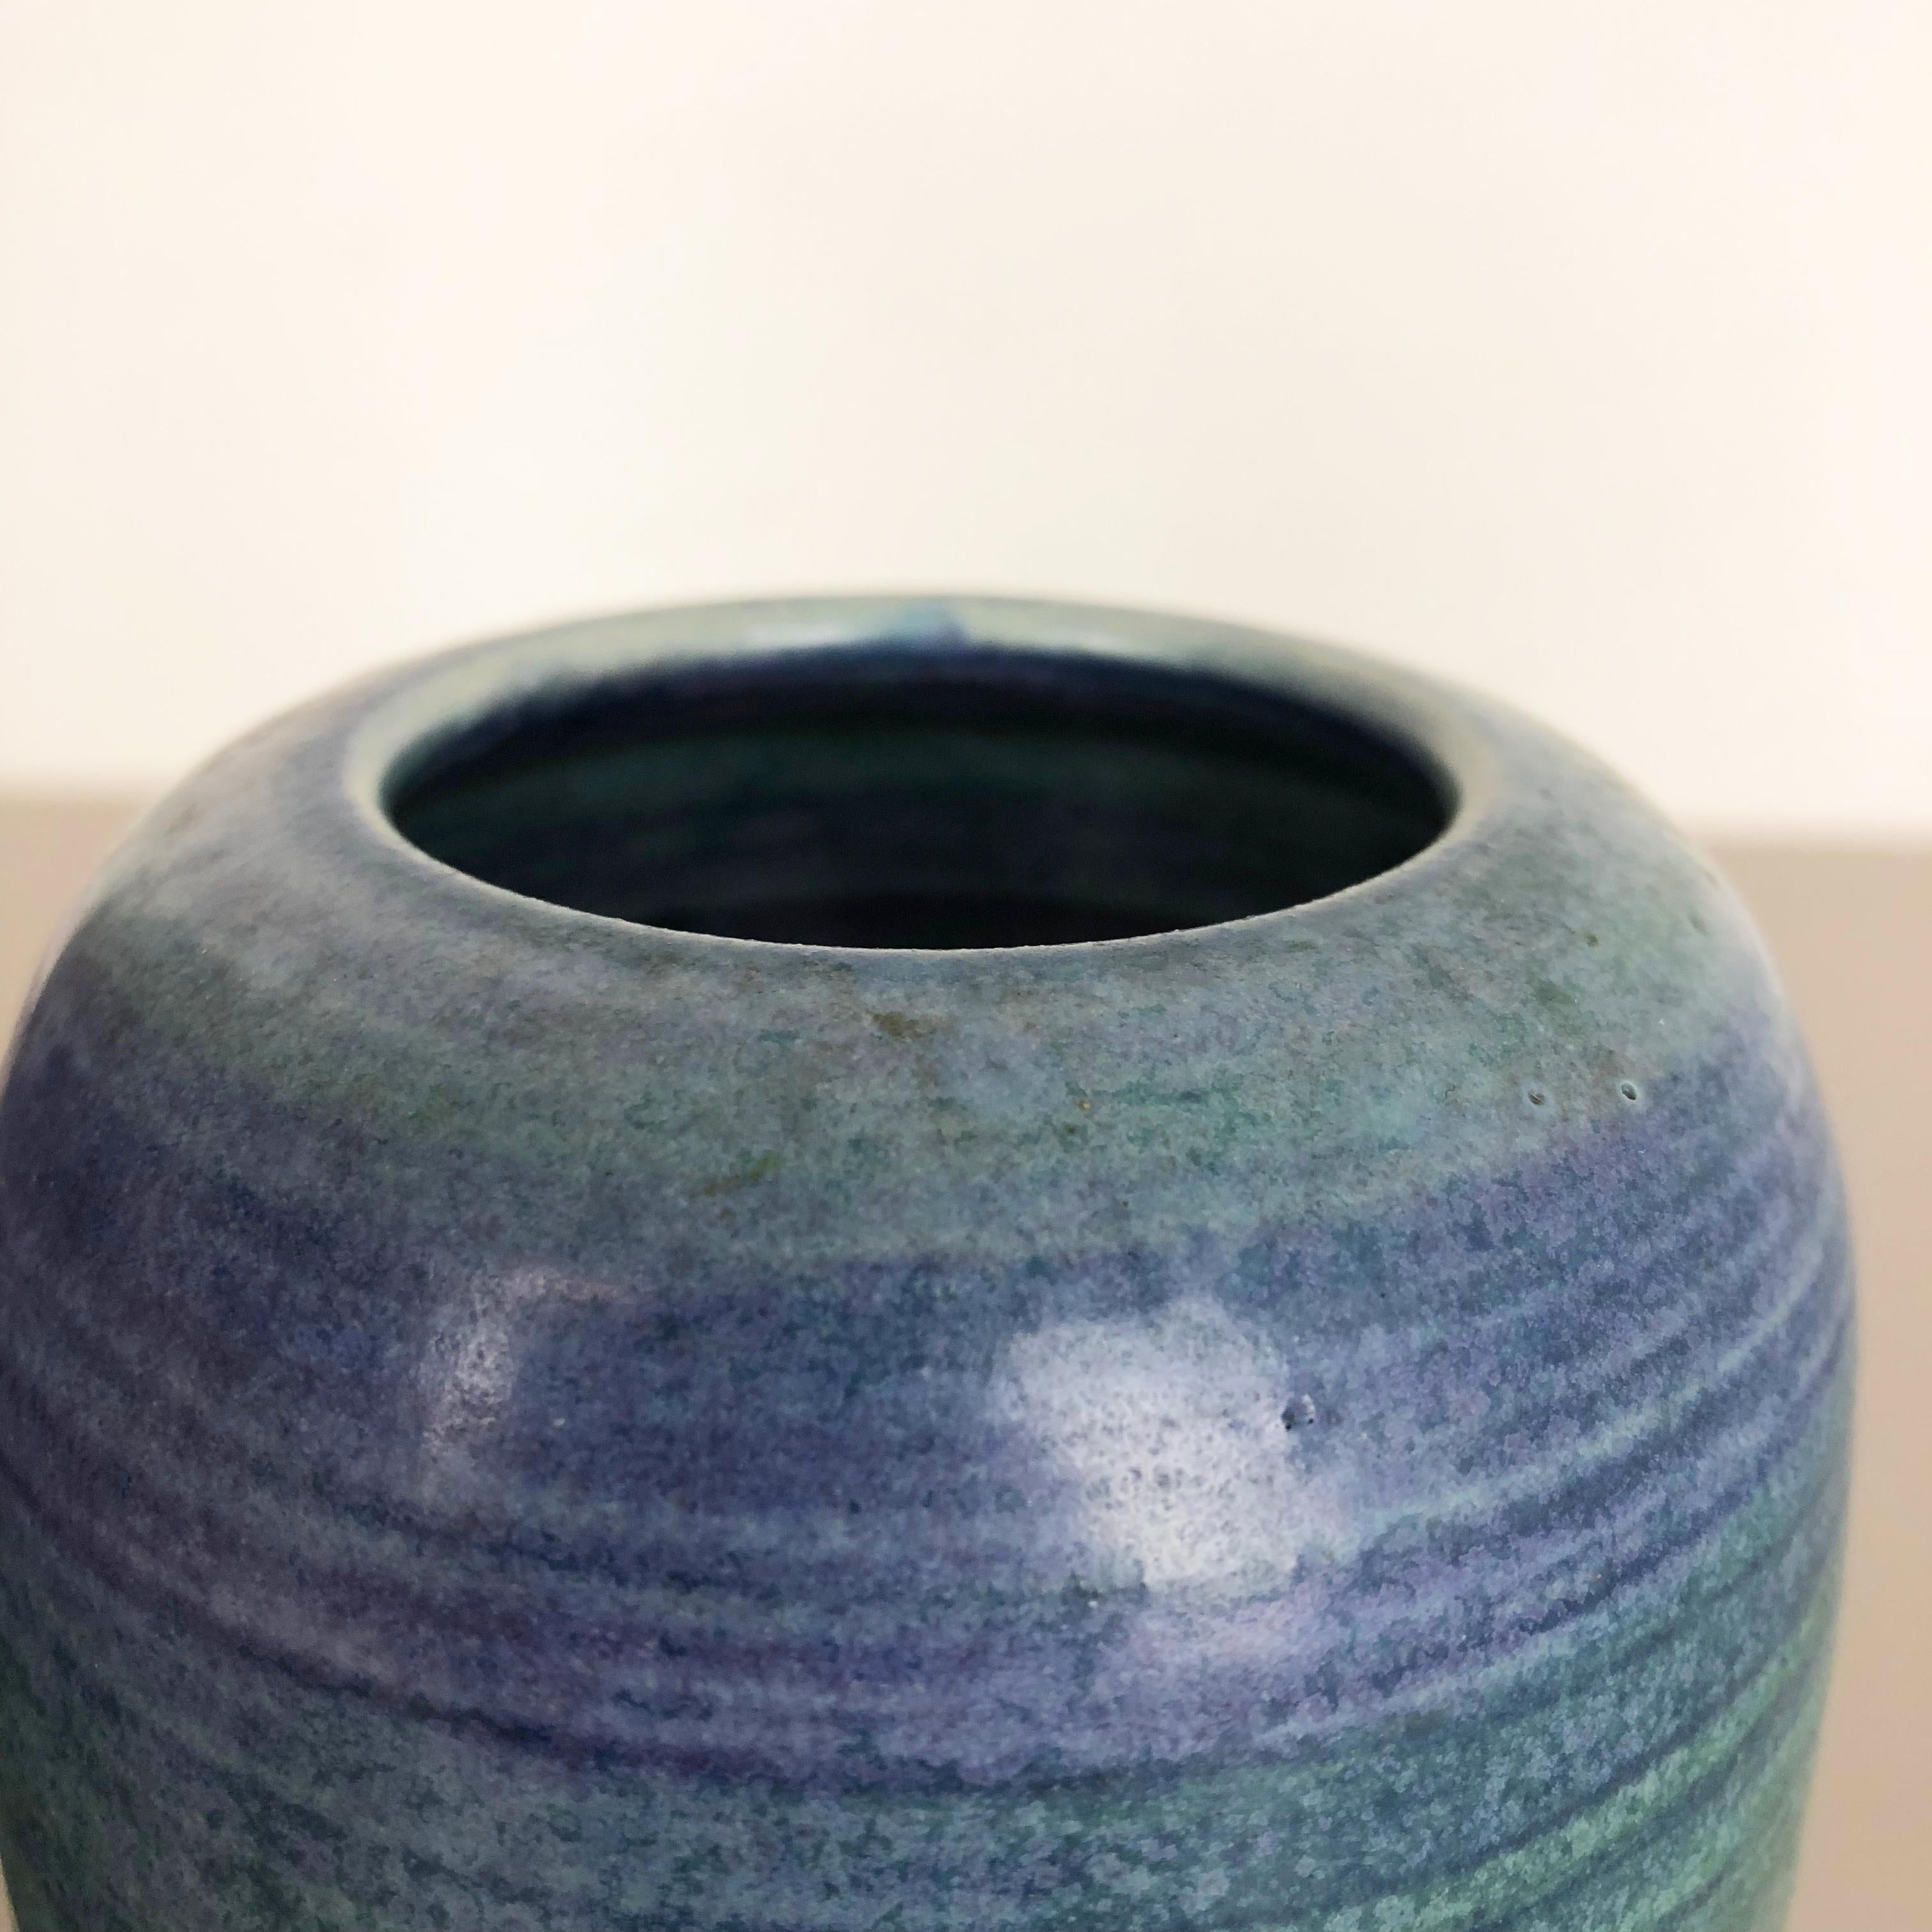 20th Century Original 1970 Ceramic Studio Pottery Vase by Piet Knepper for Mobach Netherlands For Sale